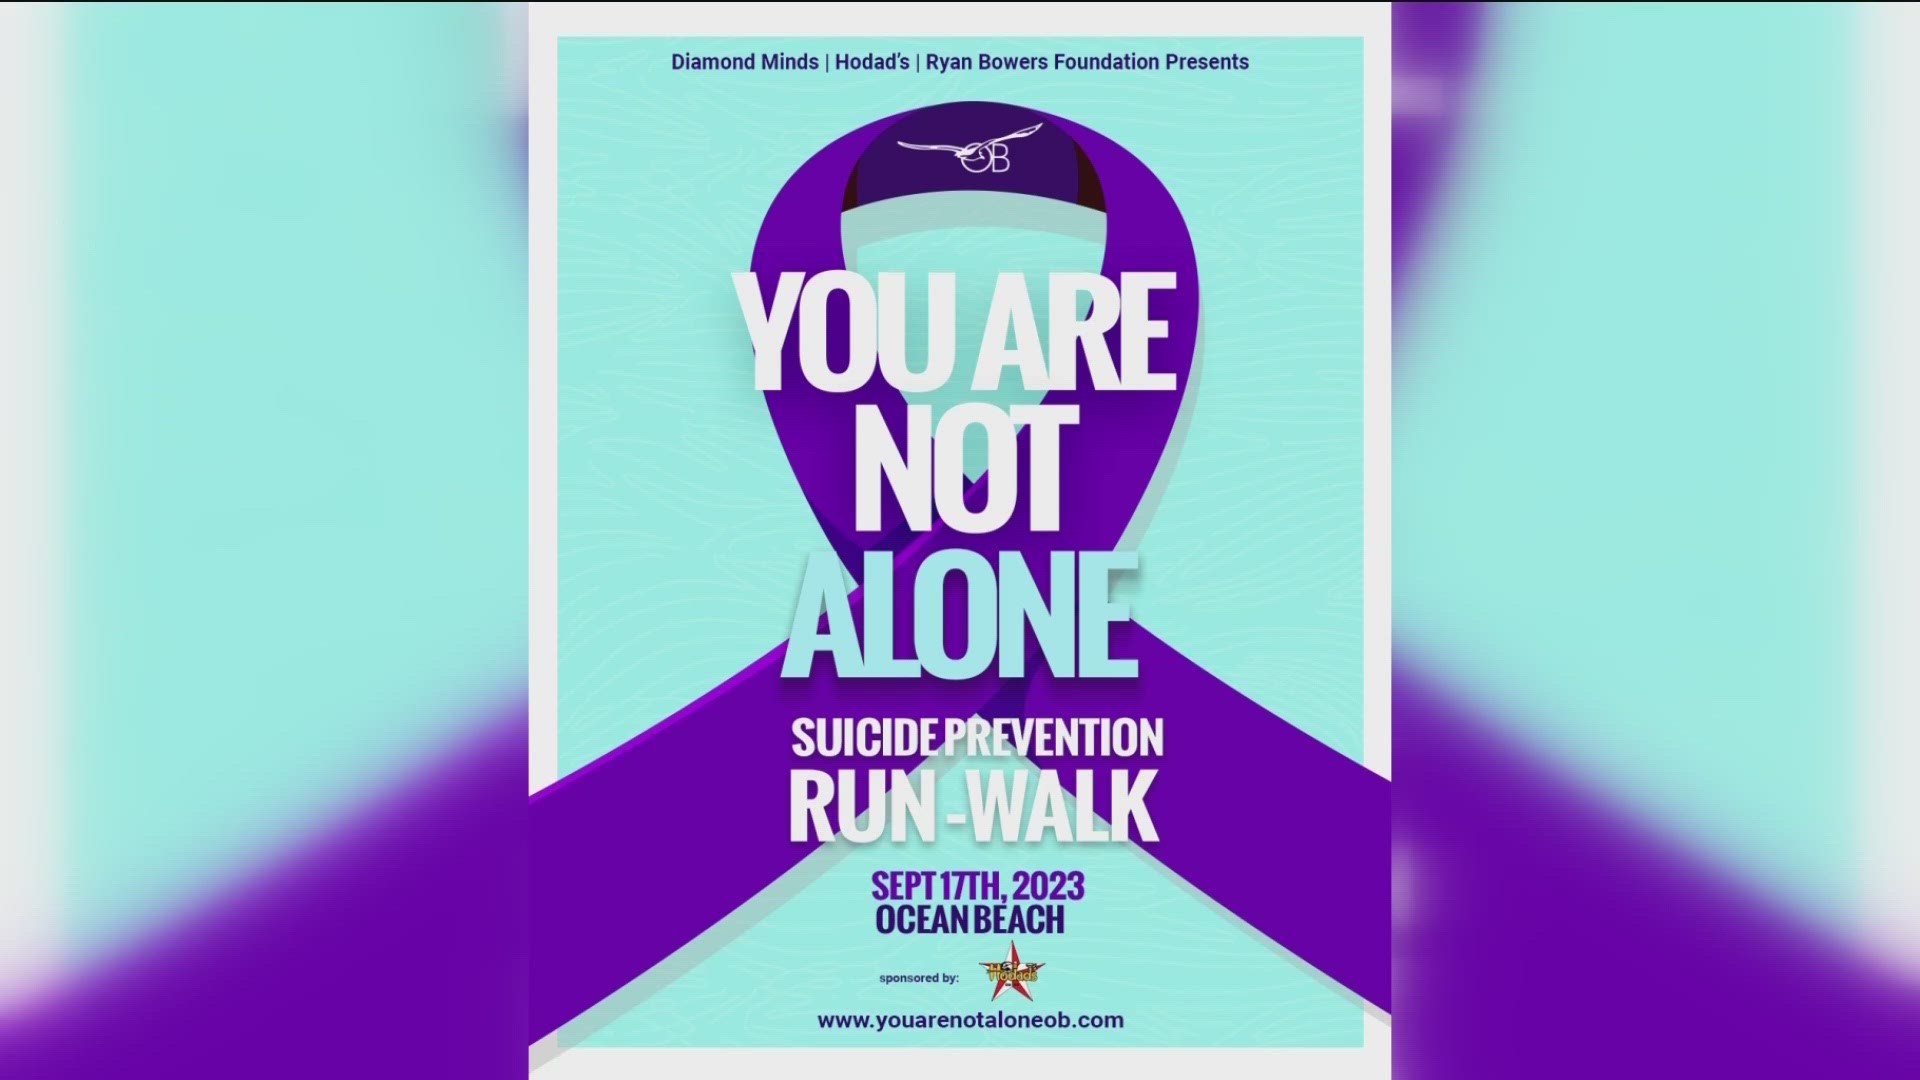 The You Are Not Alone Suicide Prevention Run-walk is September 17, 2023.